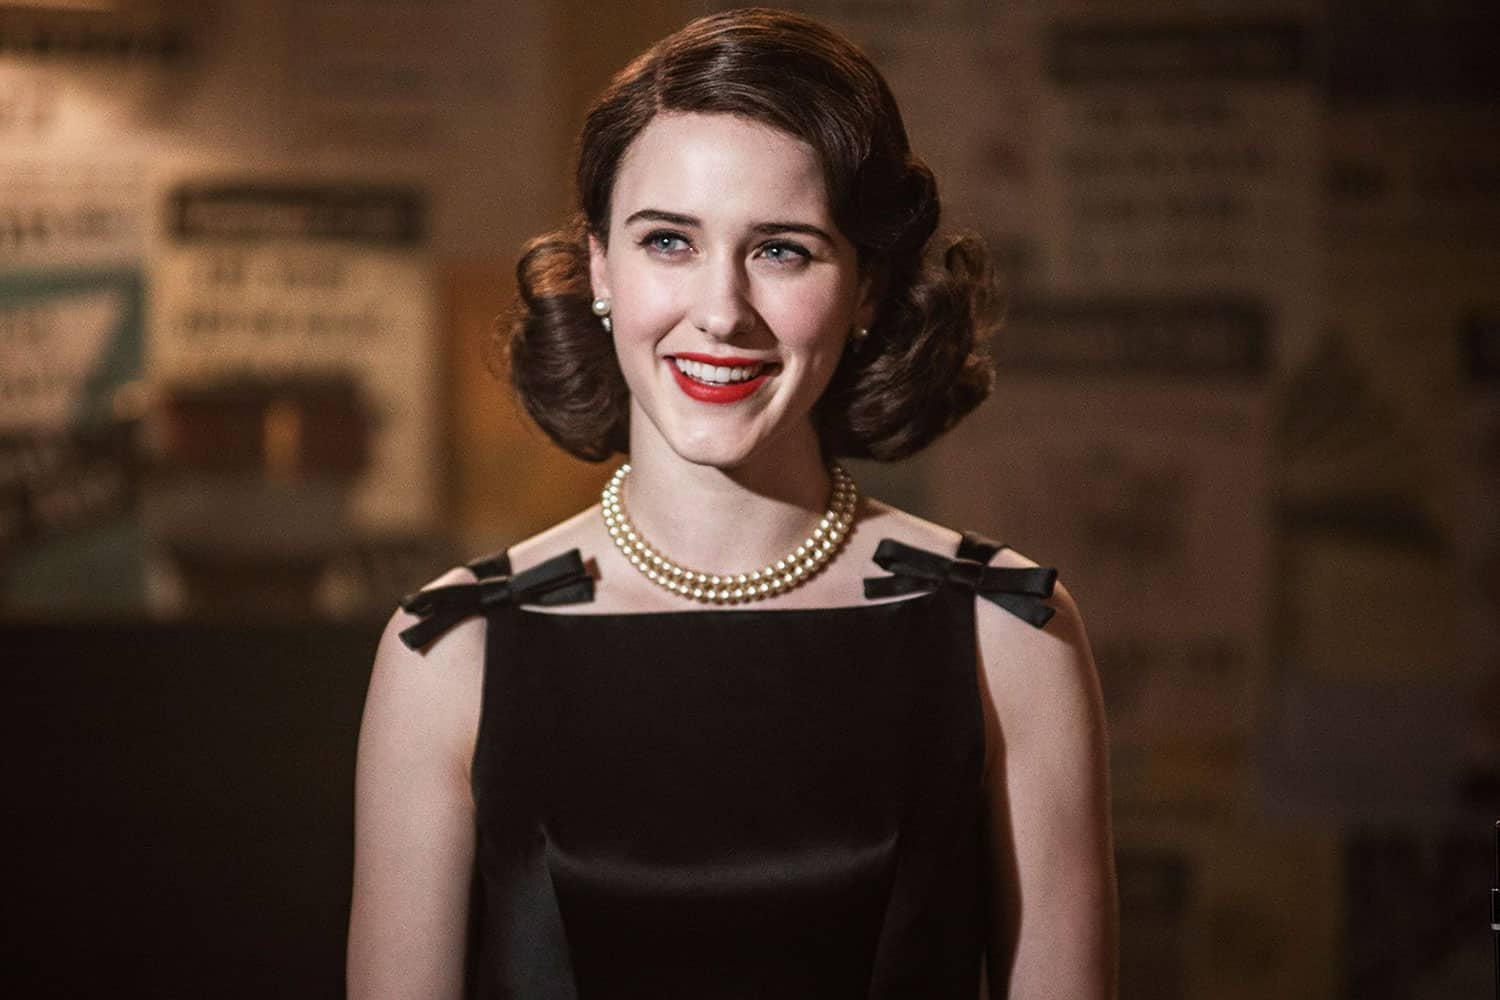 Season 3 of Amazon’s The Marvelous Mrs. Maisel Is More Epic Than Game of Thrones